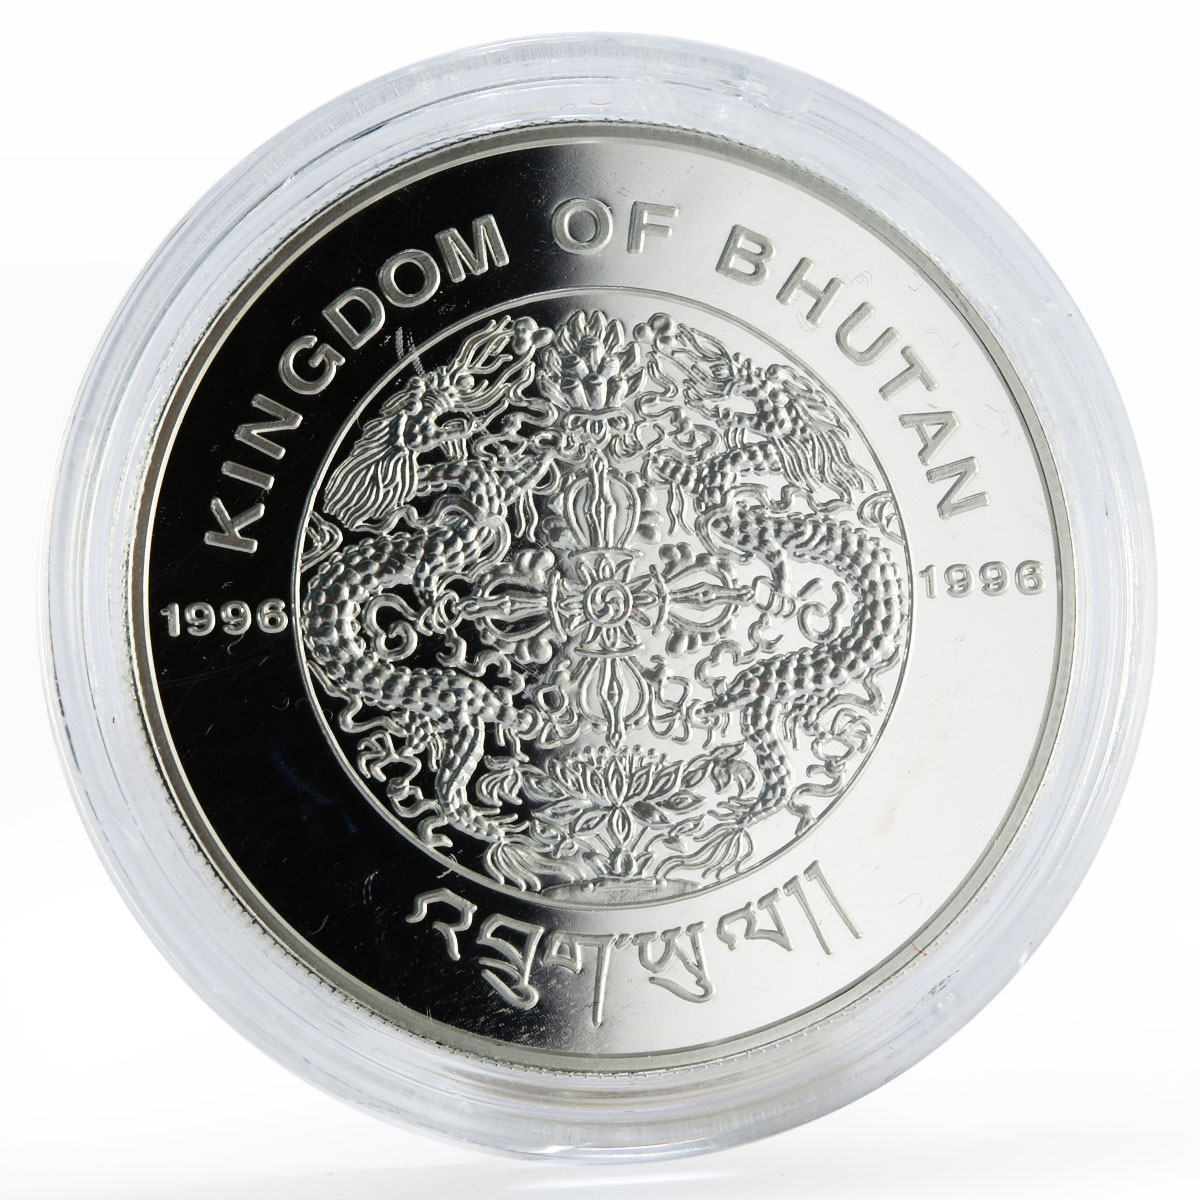 Bhutan 300 ngultrums Year of the Pig proof silver coin 1996